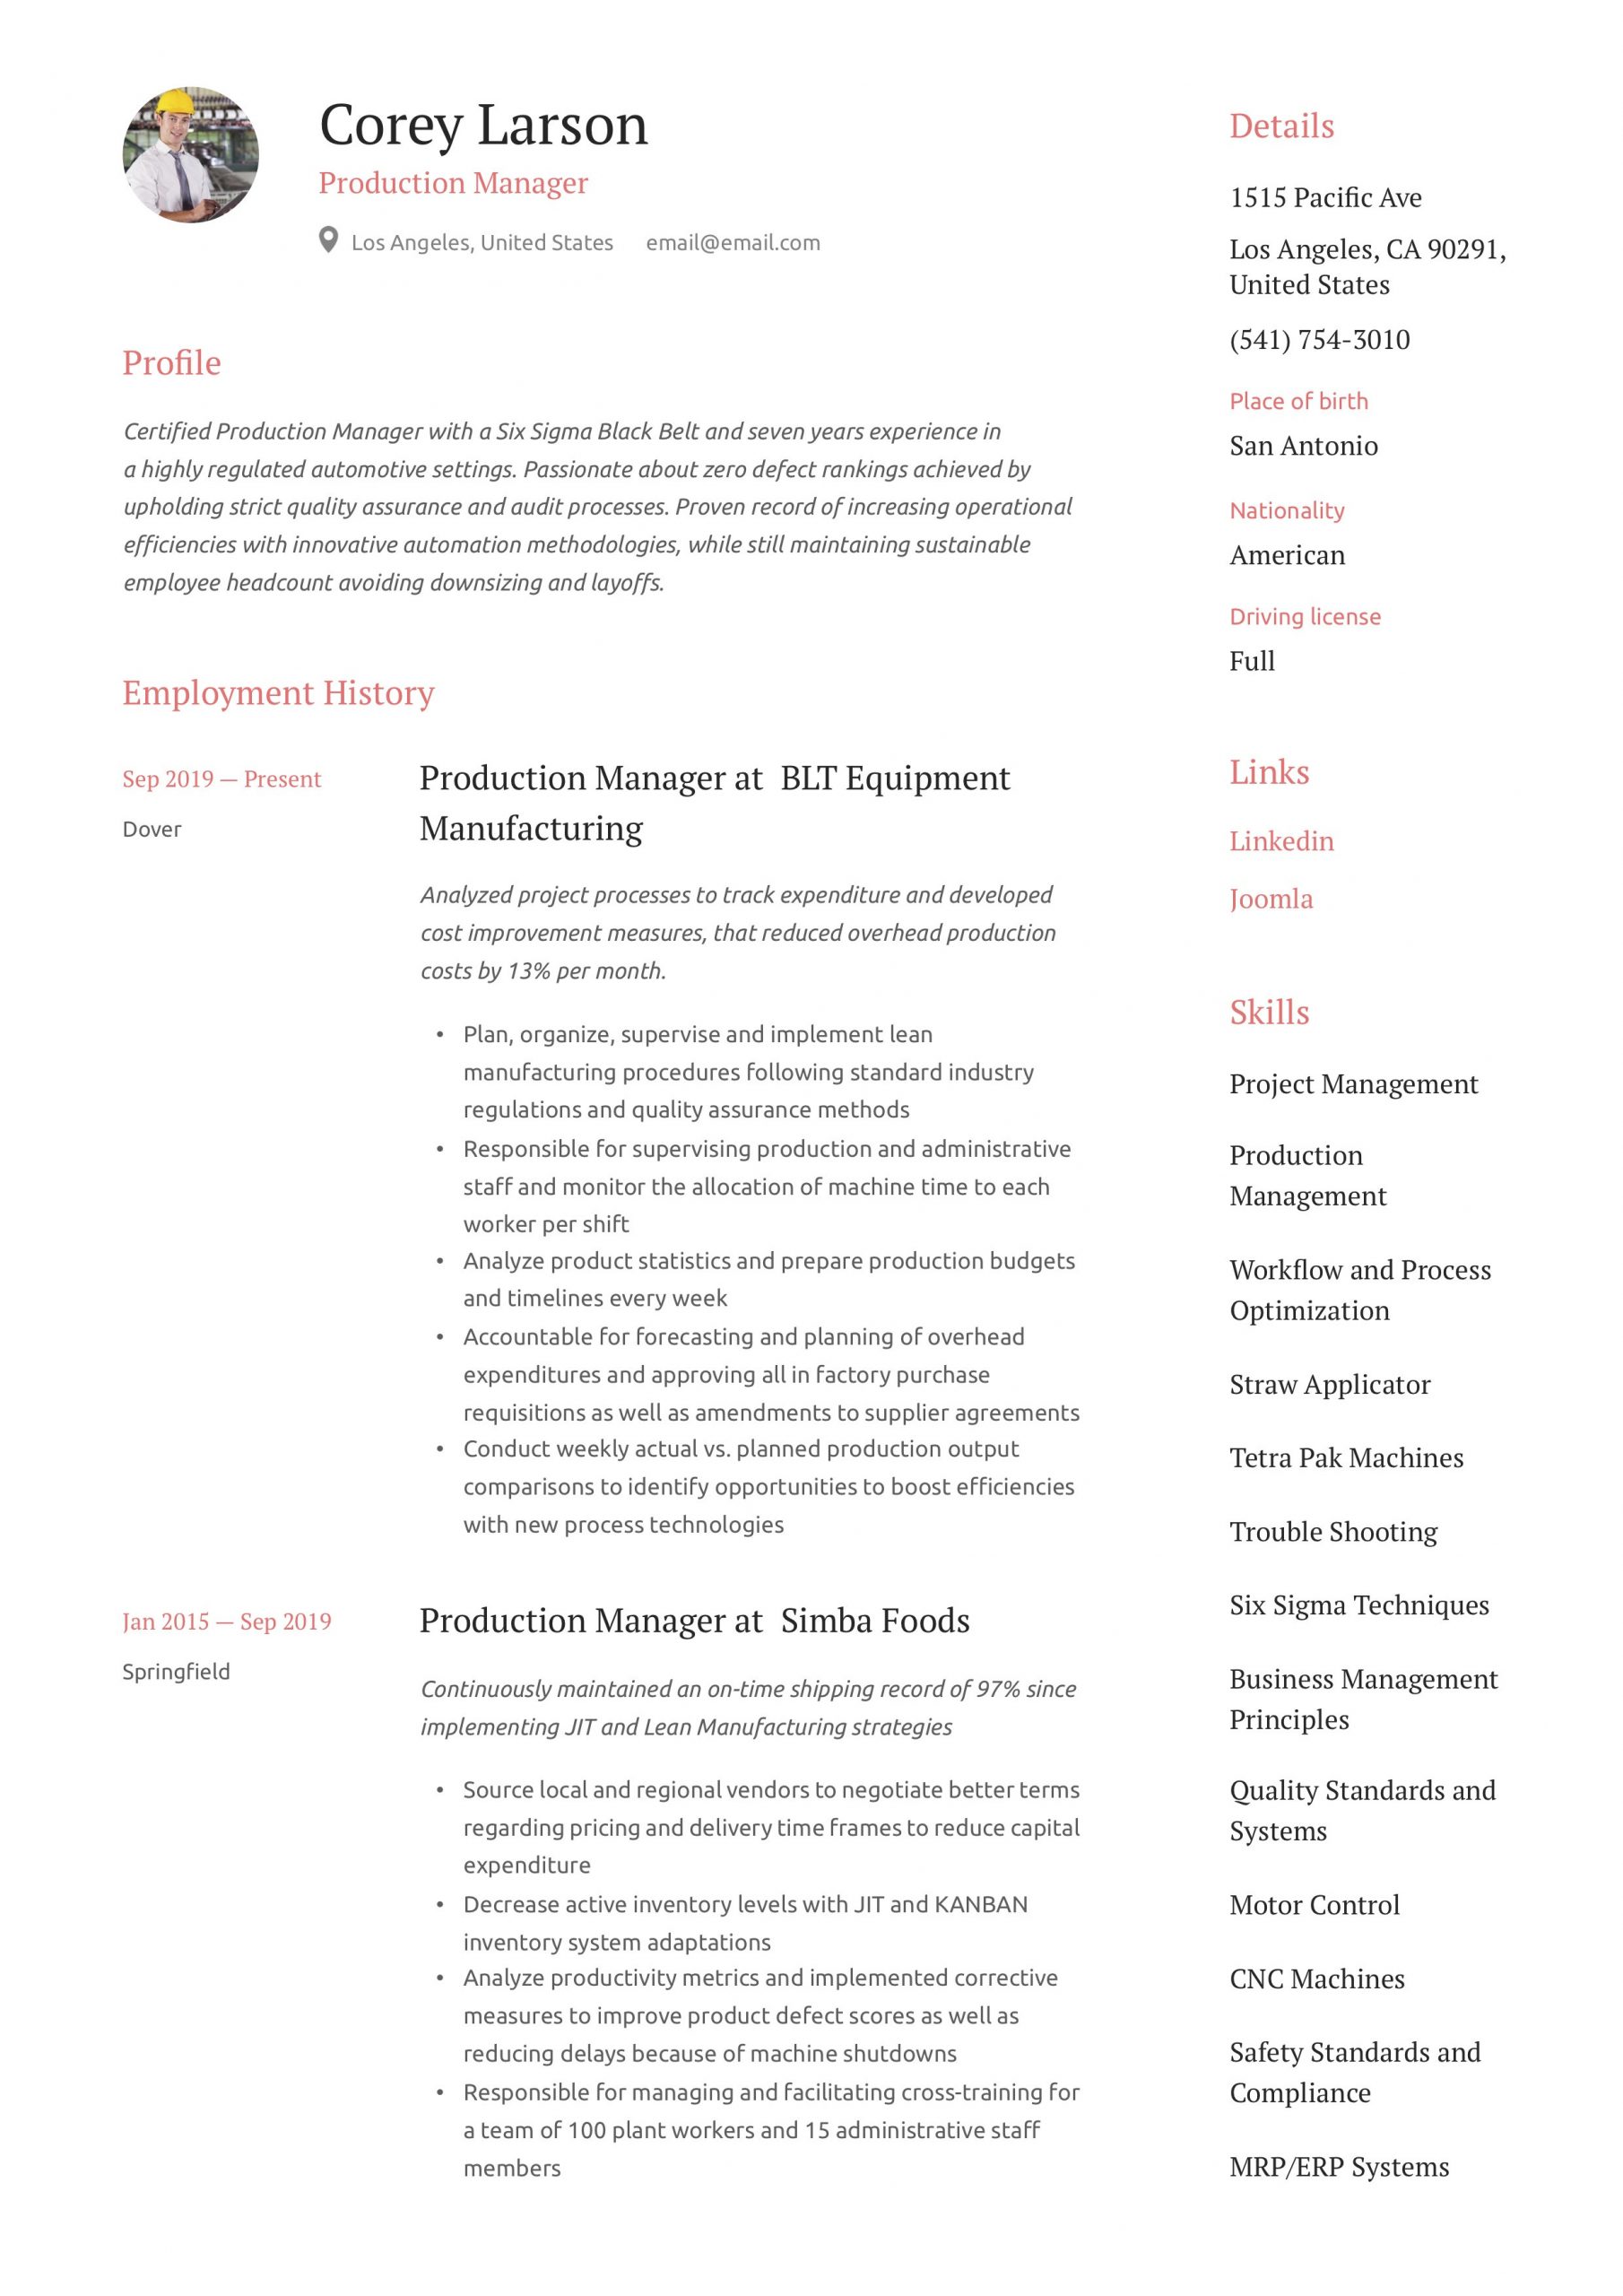 Sample Resume for Machine Shop Manager Production Manager Resume & Writing Guide  12 Templates 2020